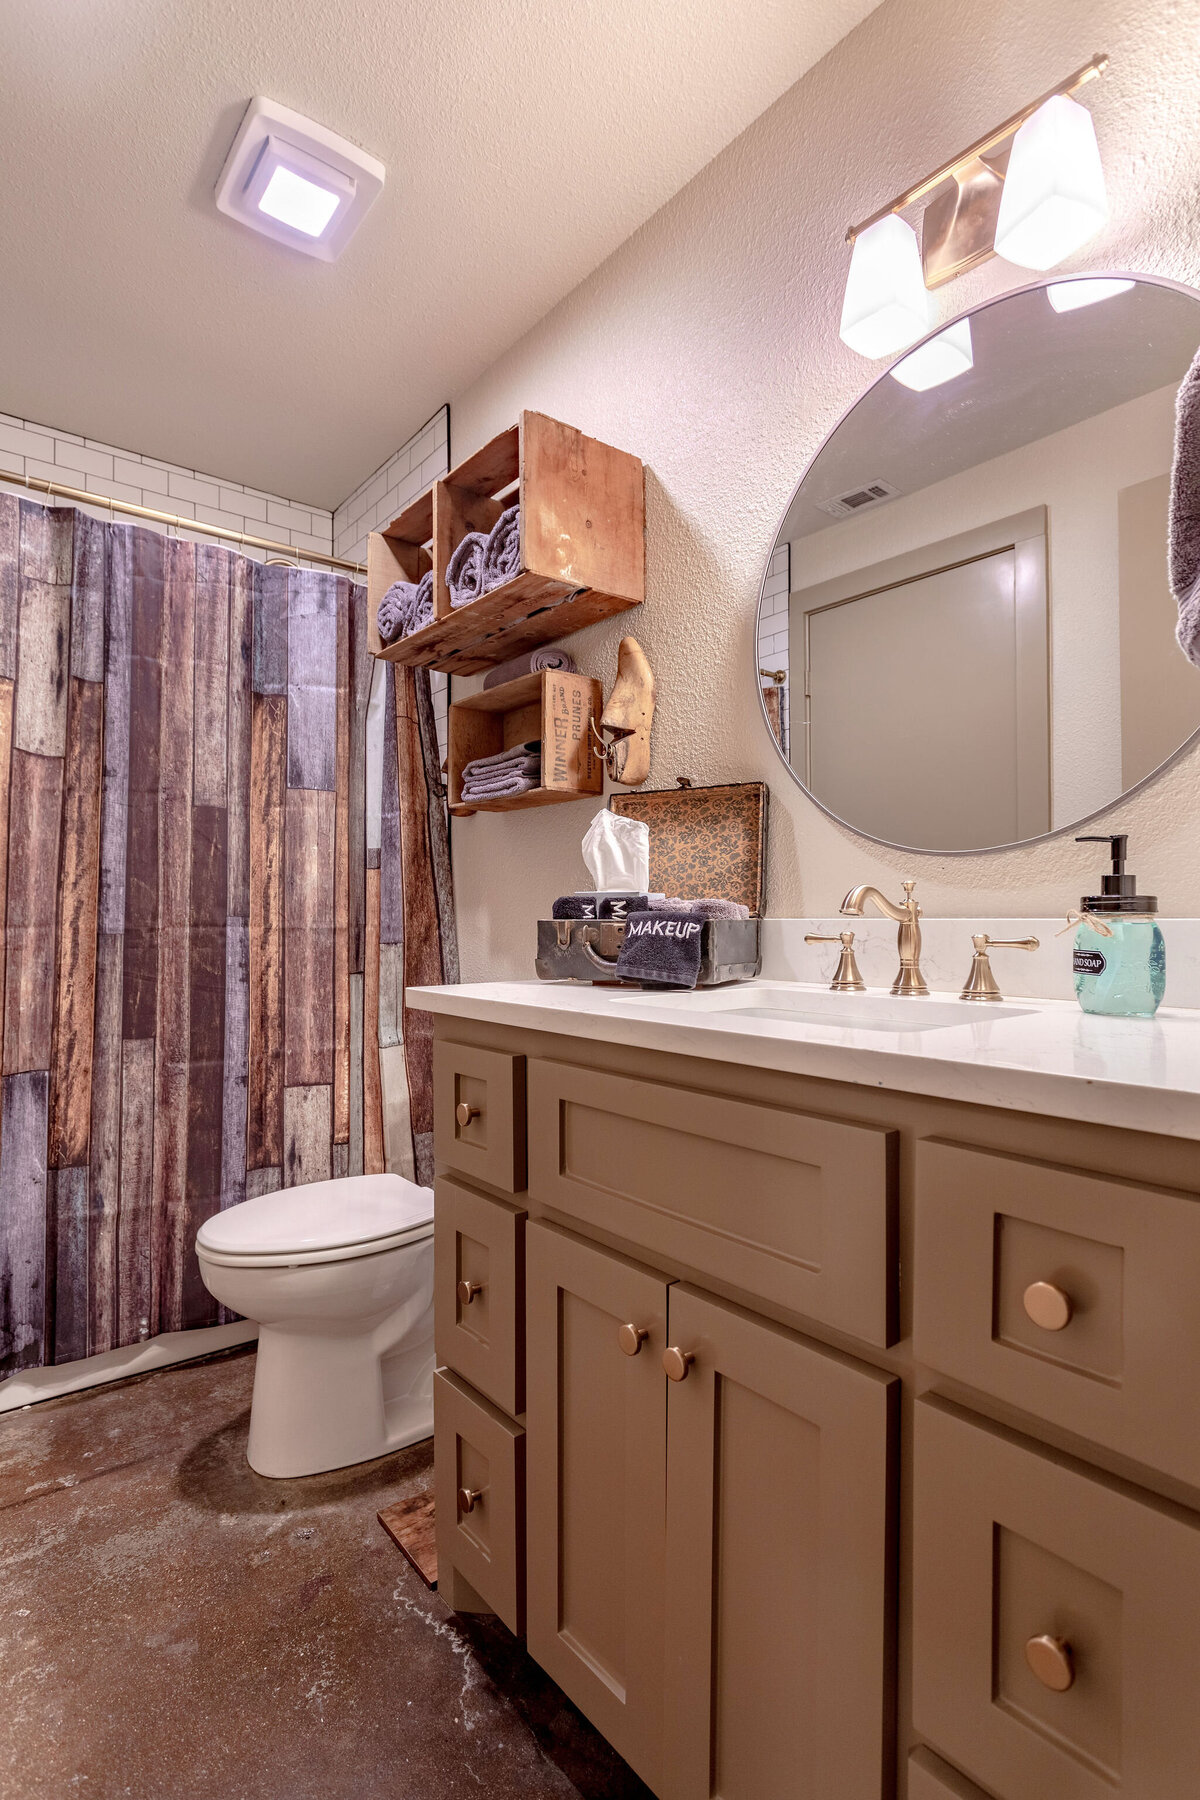 Bathroom with spacious vanity in this 2-bedroom, 2-bathroom vacation rental condo for four guests in the historic Behrens building with free parking, free wifi, vintage decor, and easy access to Baylor University, Magnolia Silos, and Cameron Park Zoo in downtown Waco, TX.